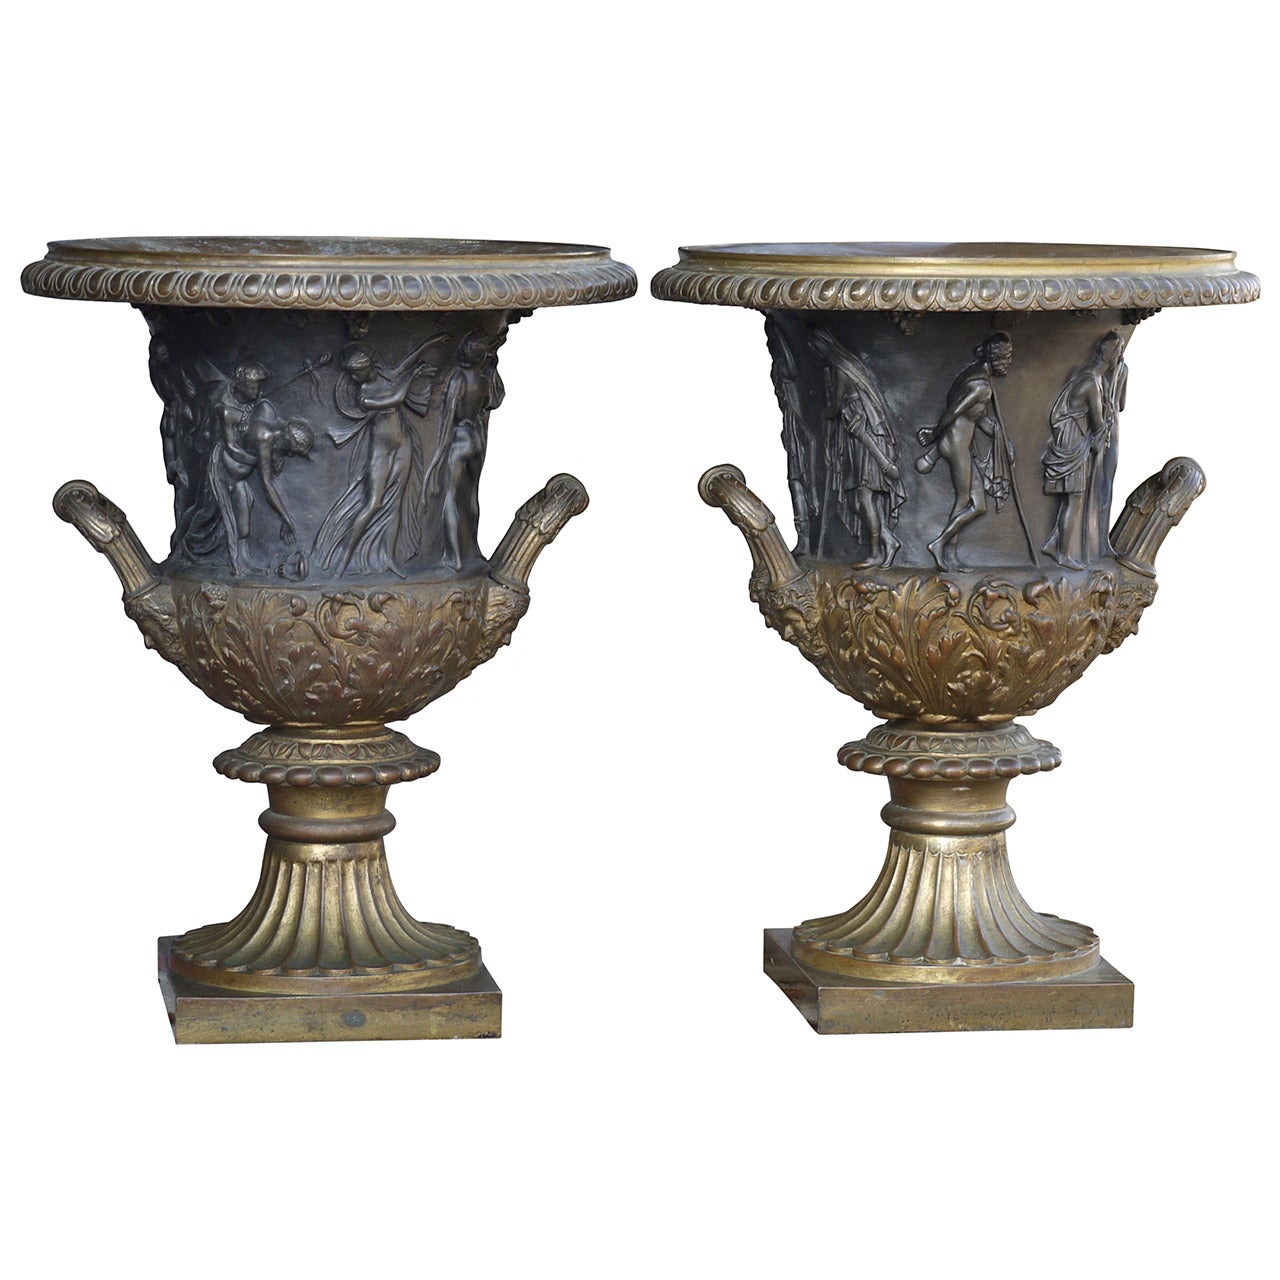 Pair of 19th Century Bronze Campana Urns After the Medici and Borghese Models For Sale